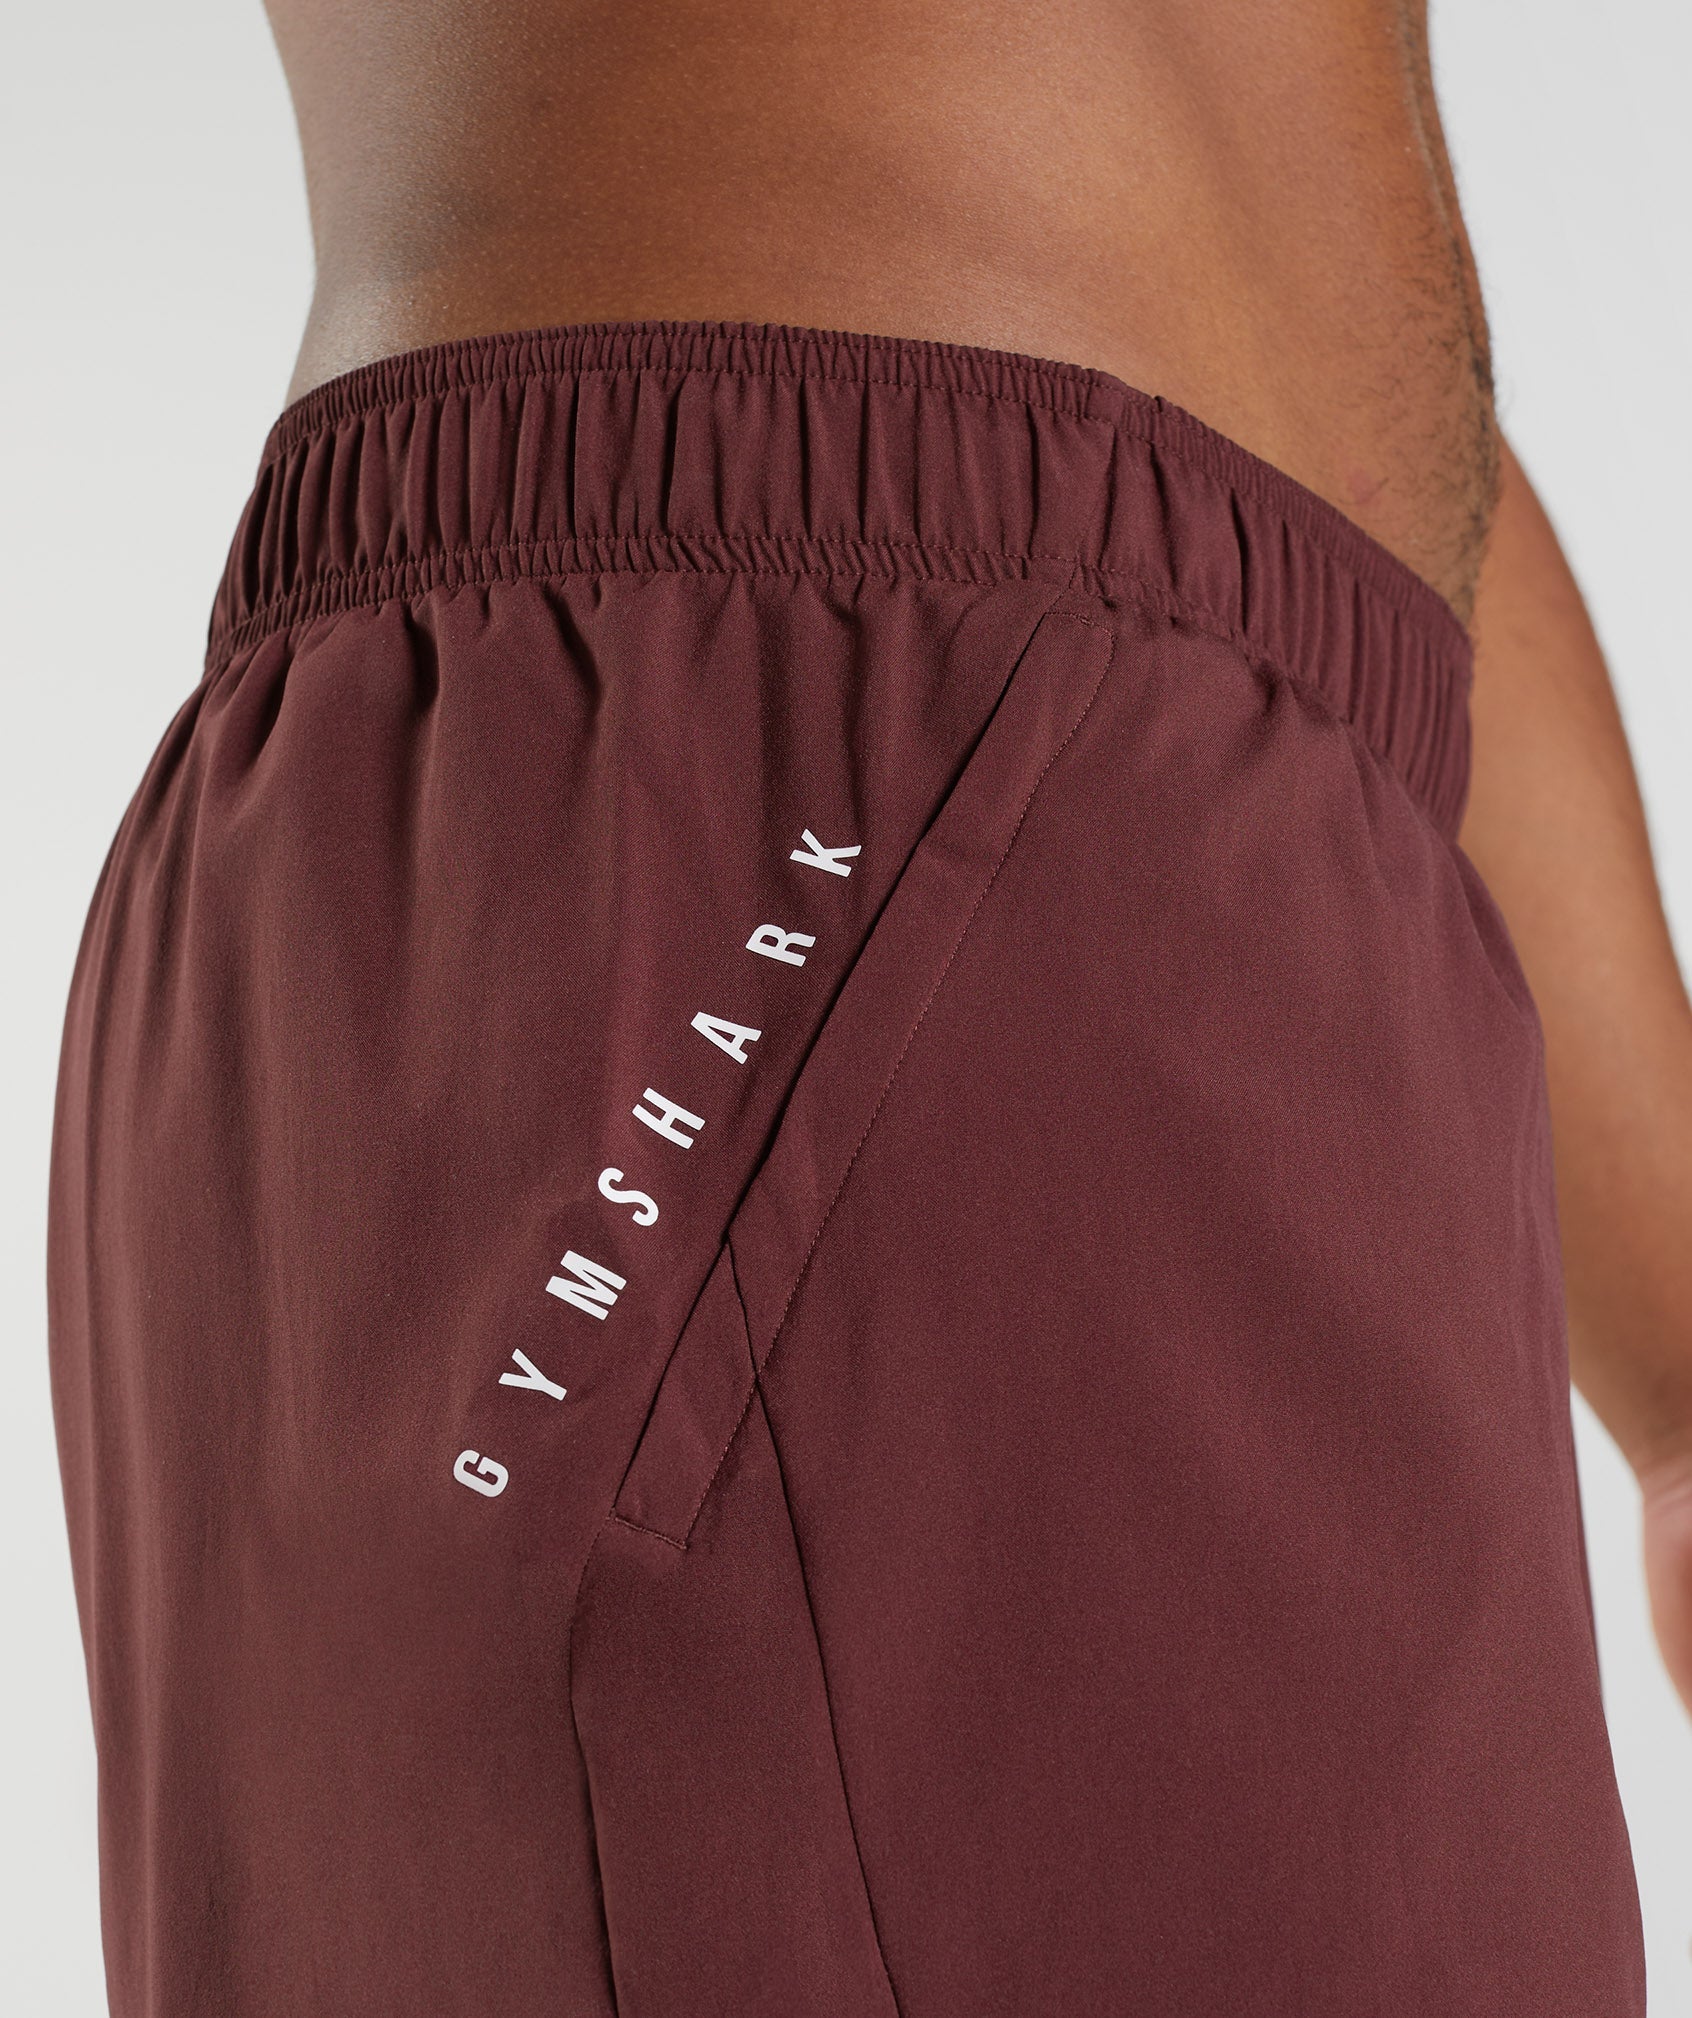 Sport 5" 2 In 1 Shorts in Baked Maroon/Salsa Red - view 5